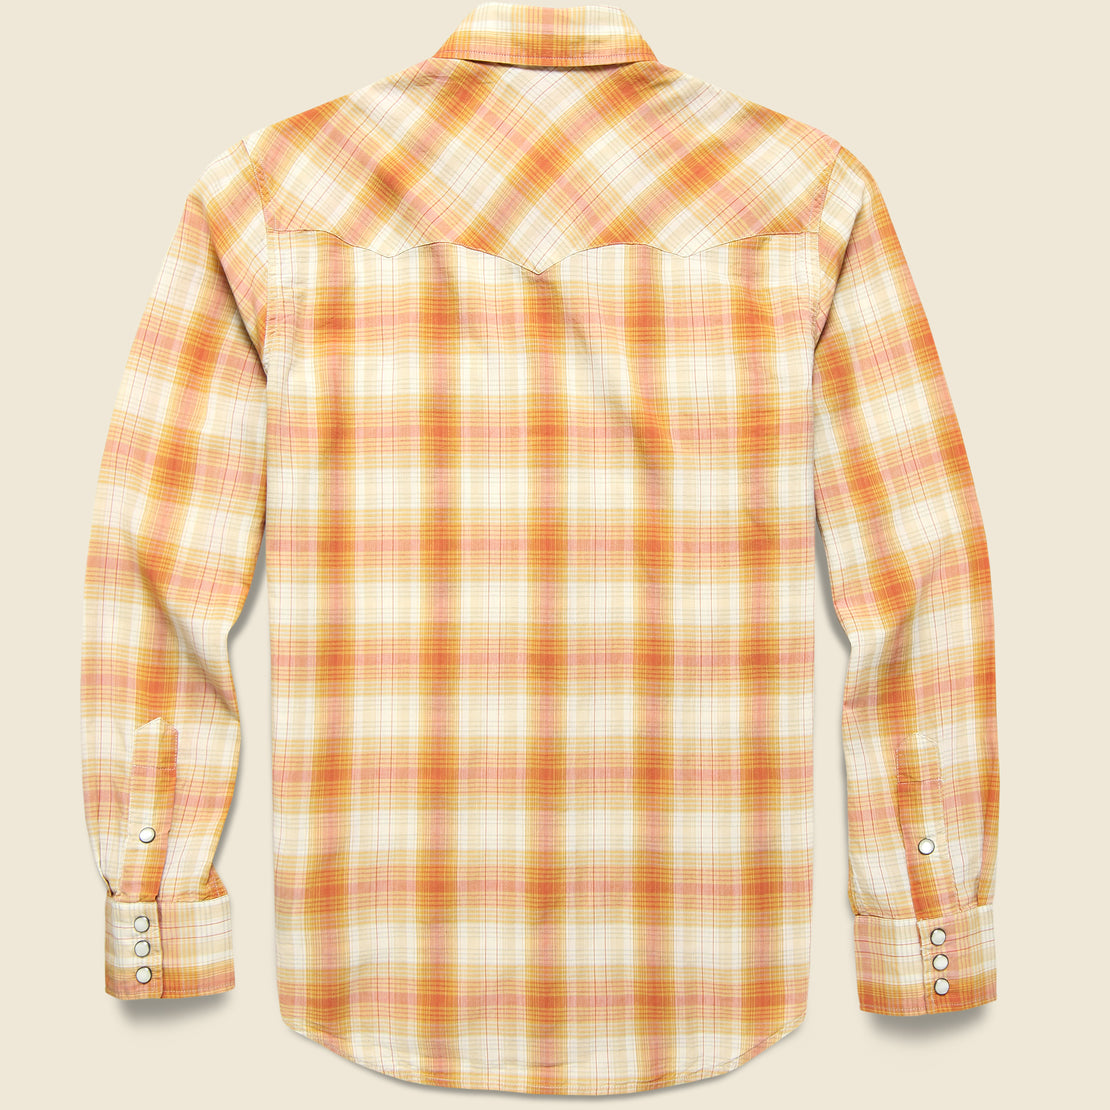 Buffalo Western Shirt - Sunset Orange - RRL - STAG Provisions - Tops - L/S Woven - Plaid